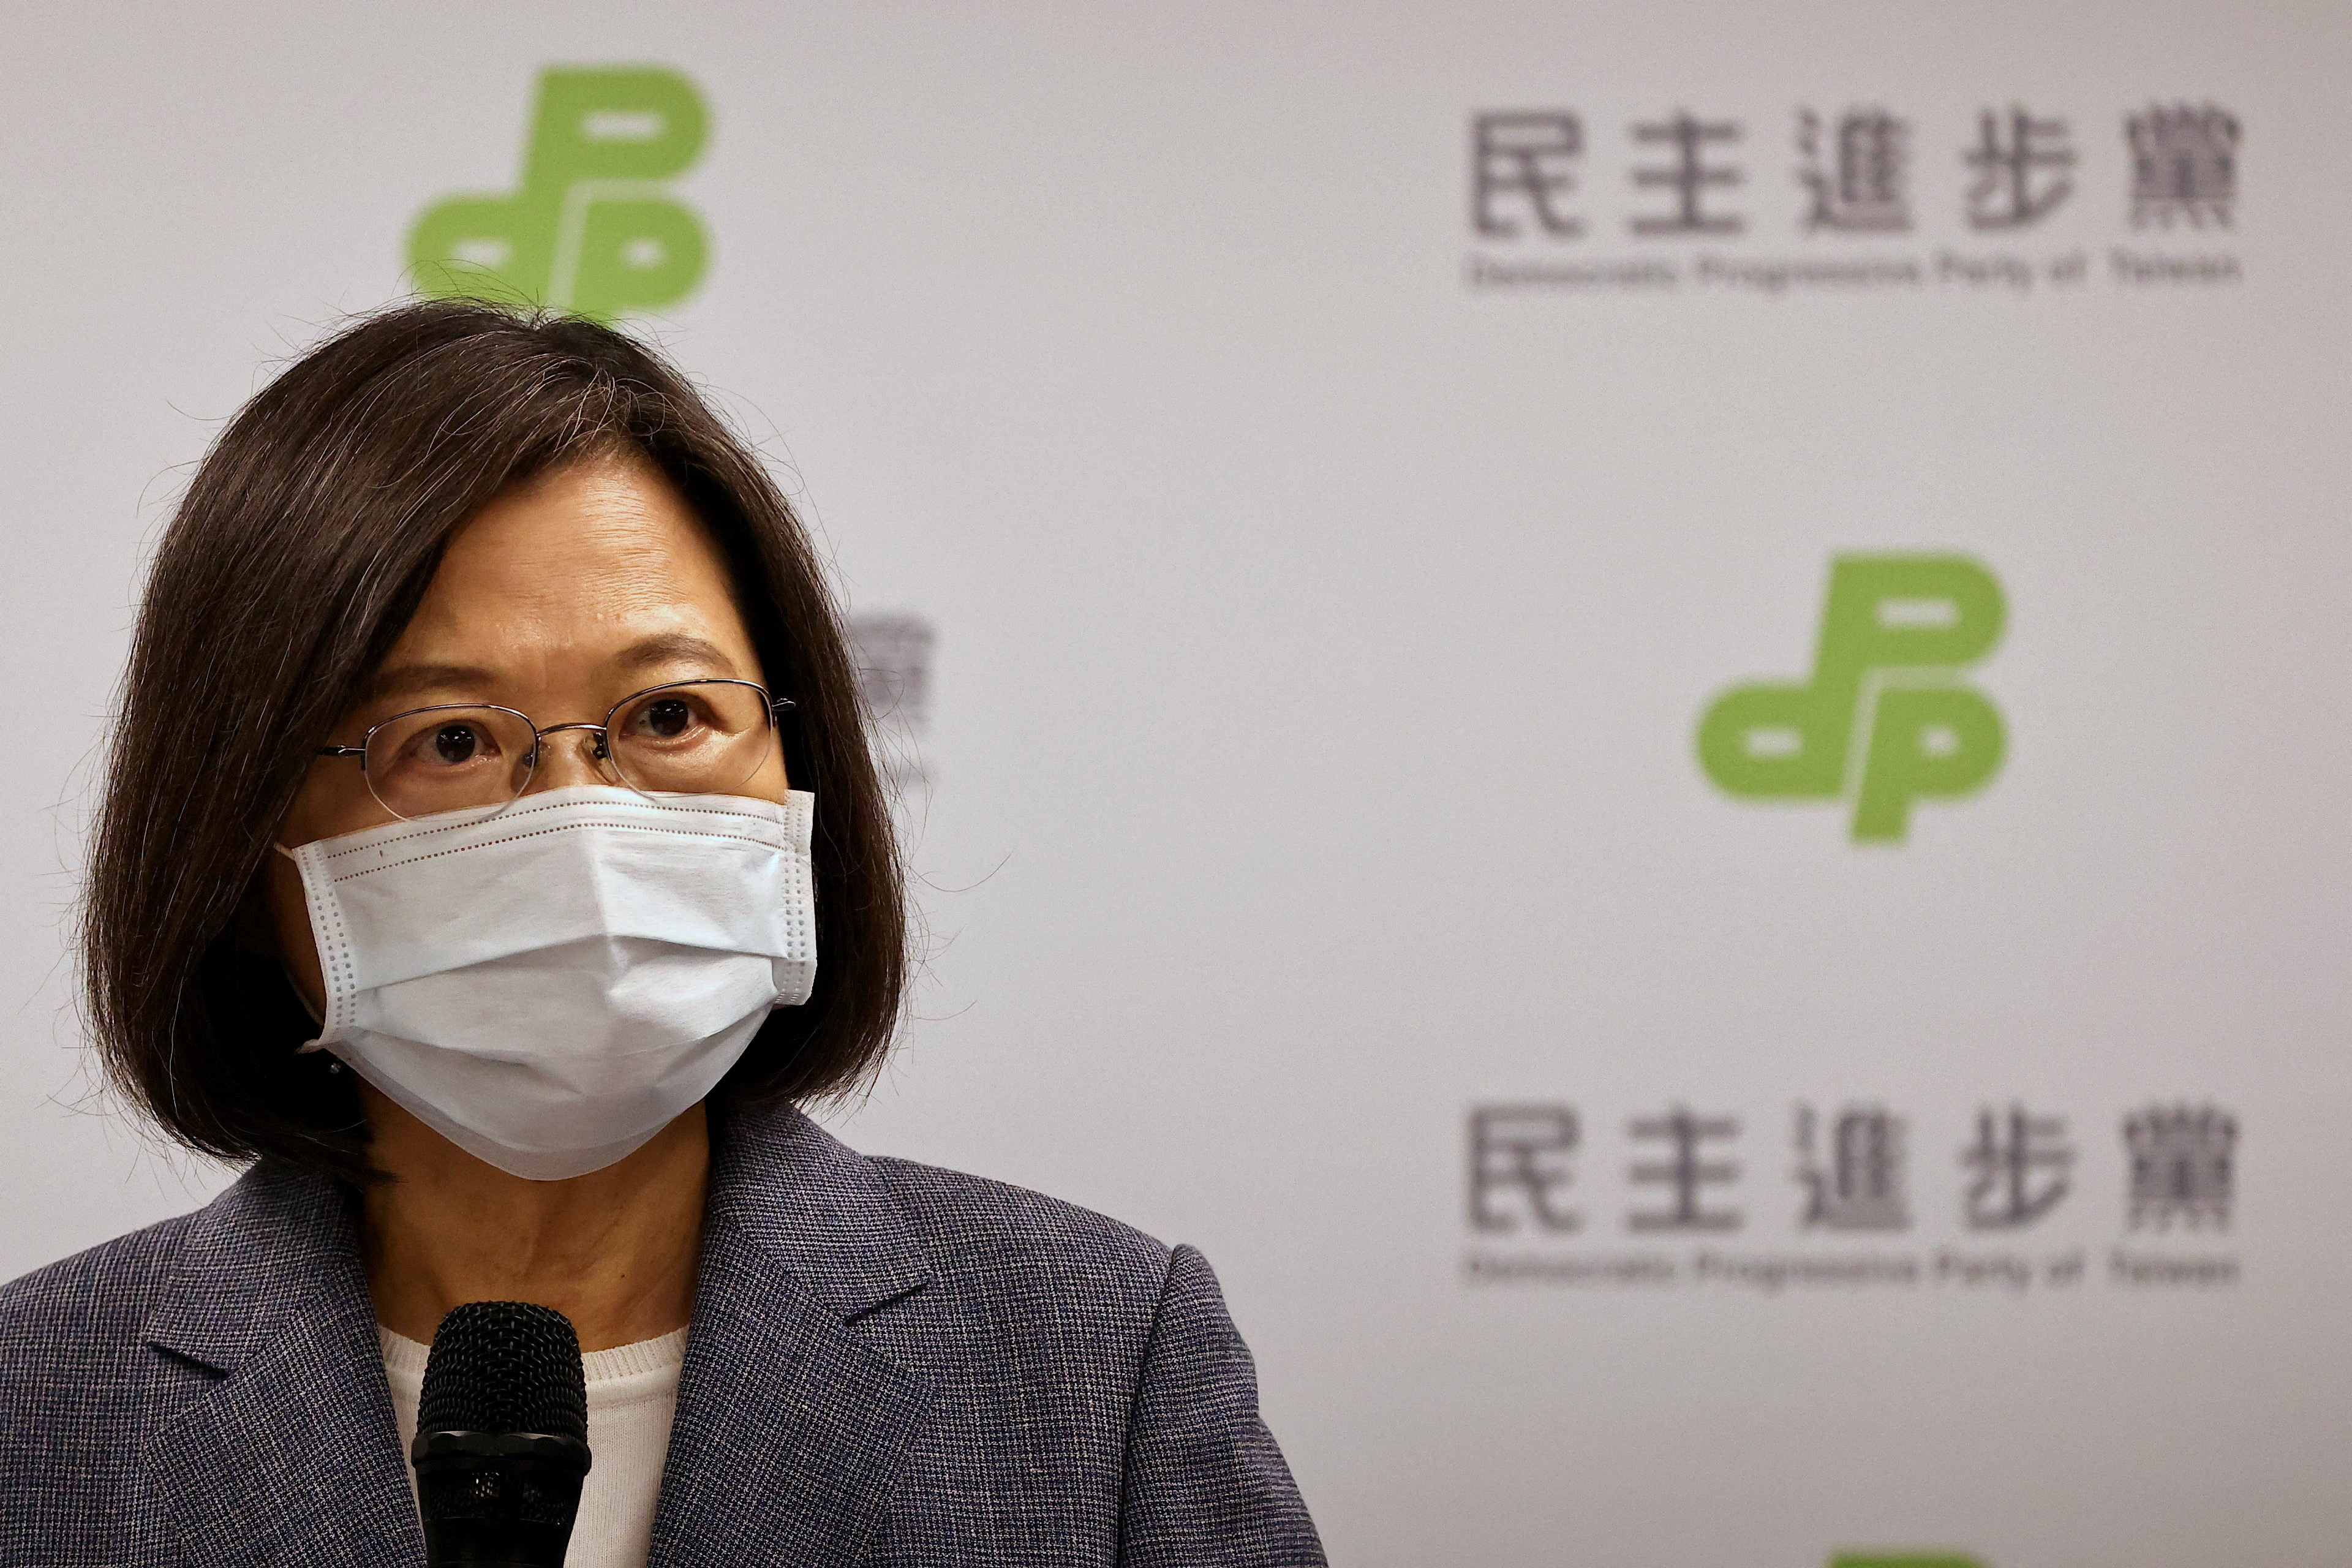 Taiwanese President Tsai announces to resign as Democratic Progressive Party chair to take responsibility for the party's performance in the local elections in Taipei